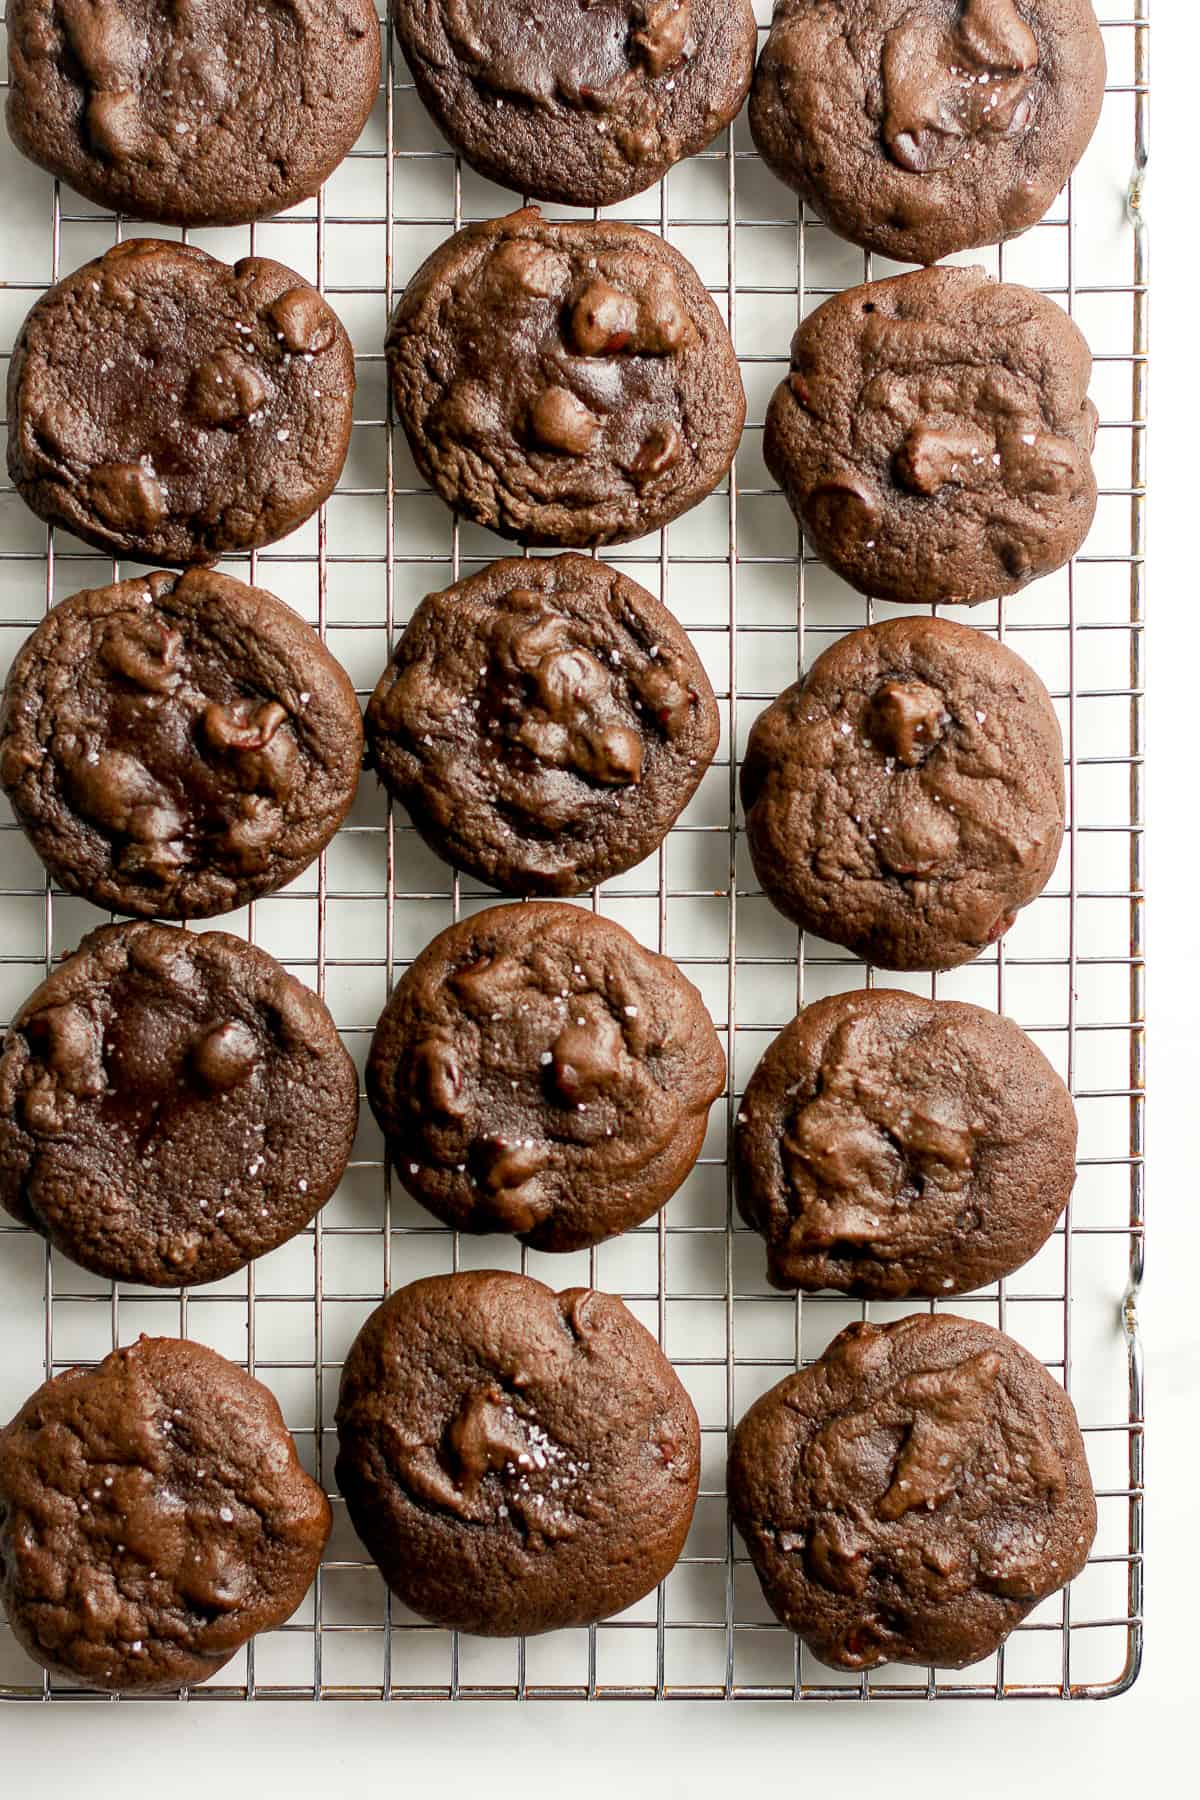 A cooling rack with chocolate cookies.